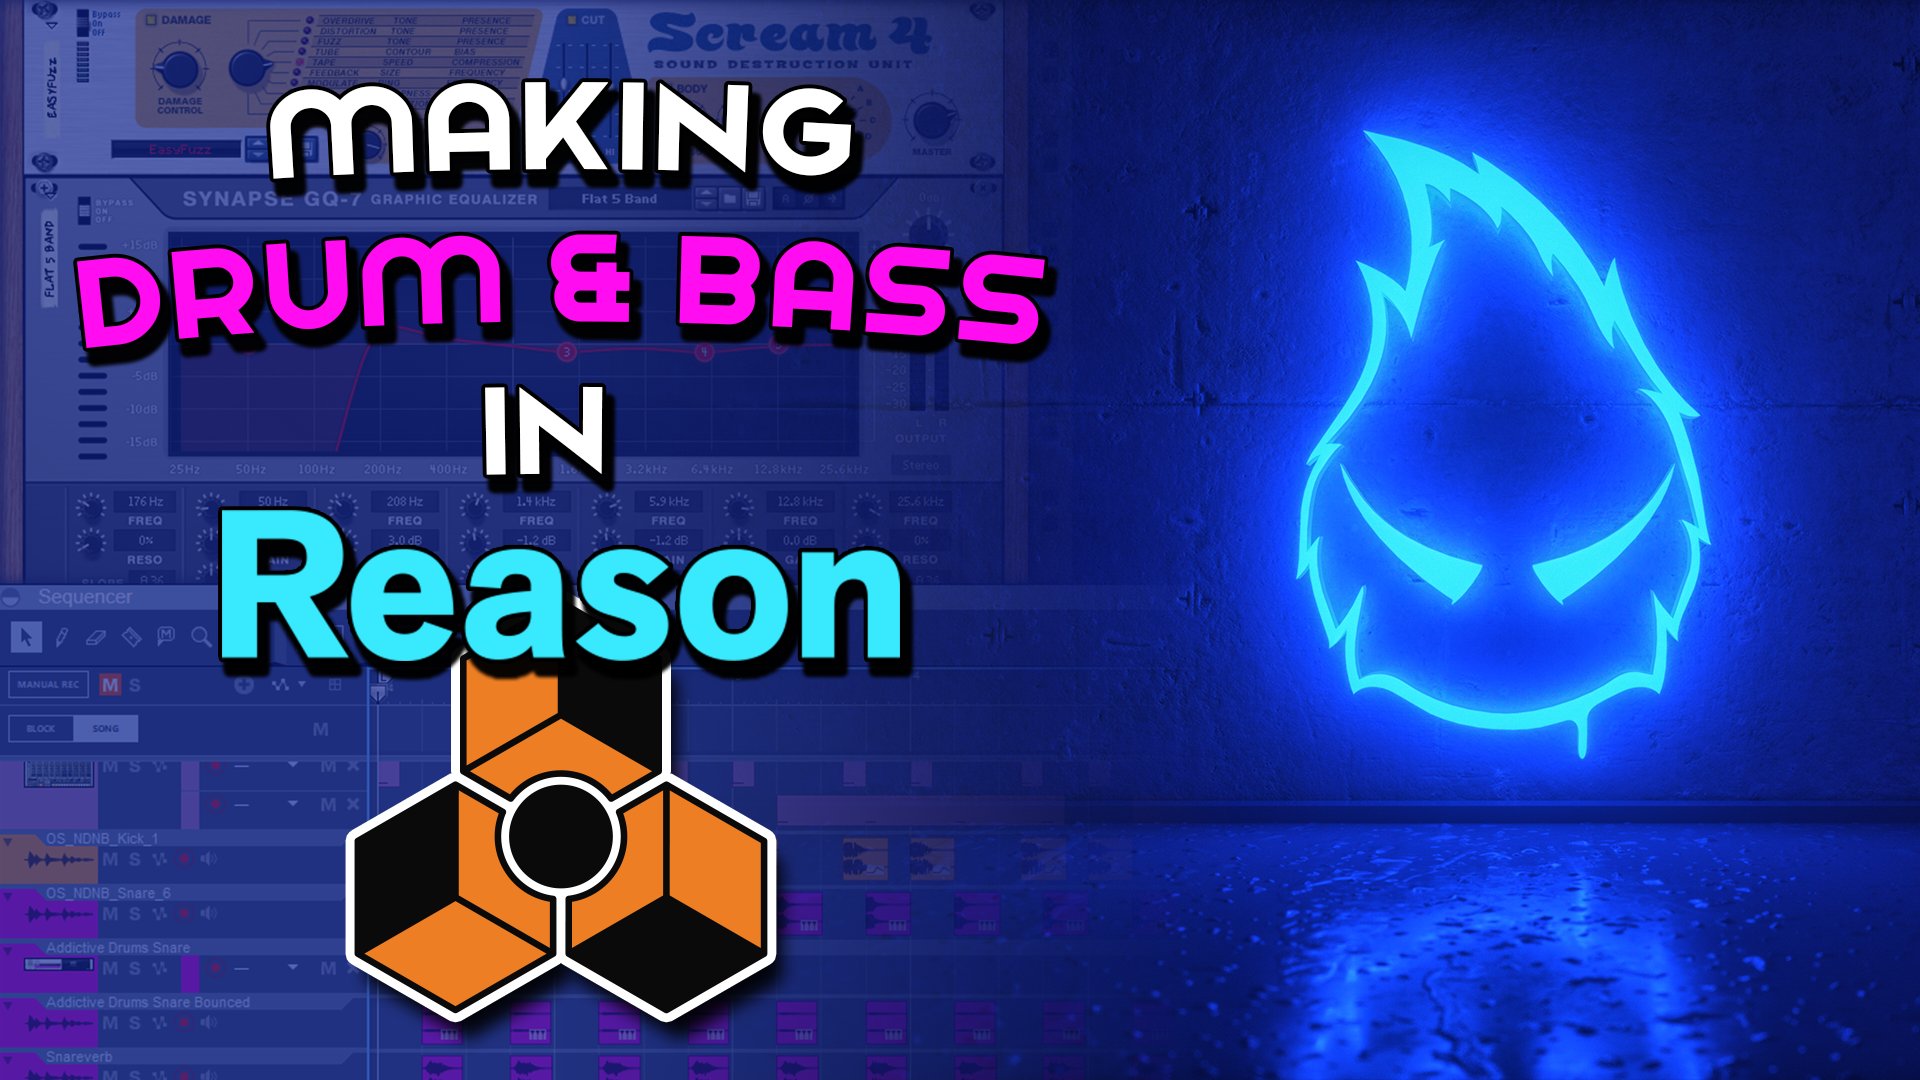 How to Make a Drum n Bass Track in Reason